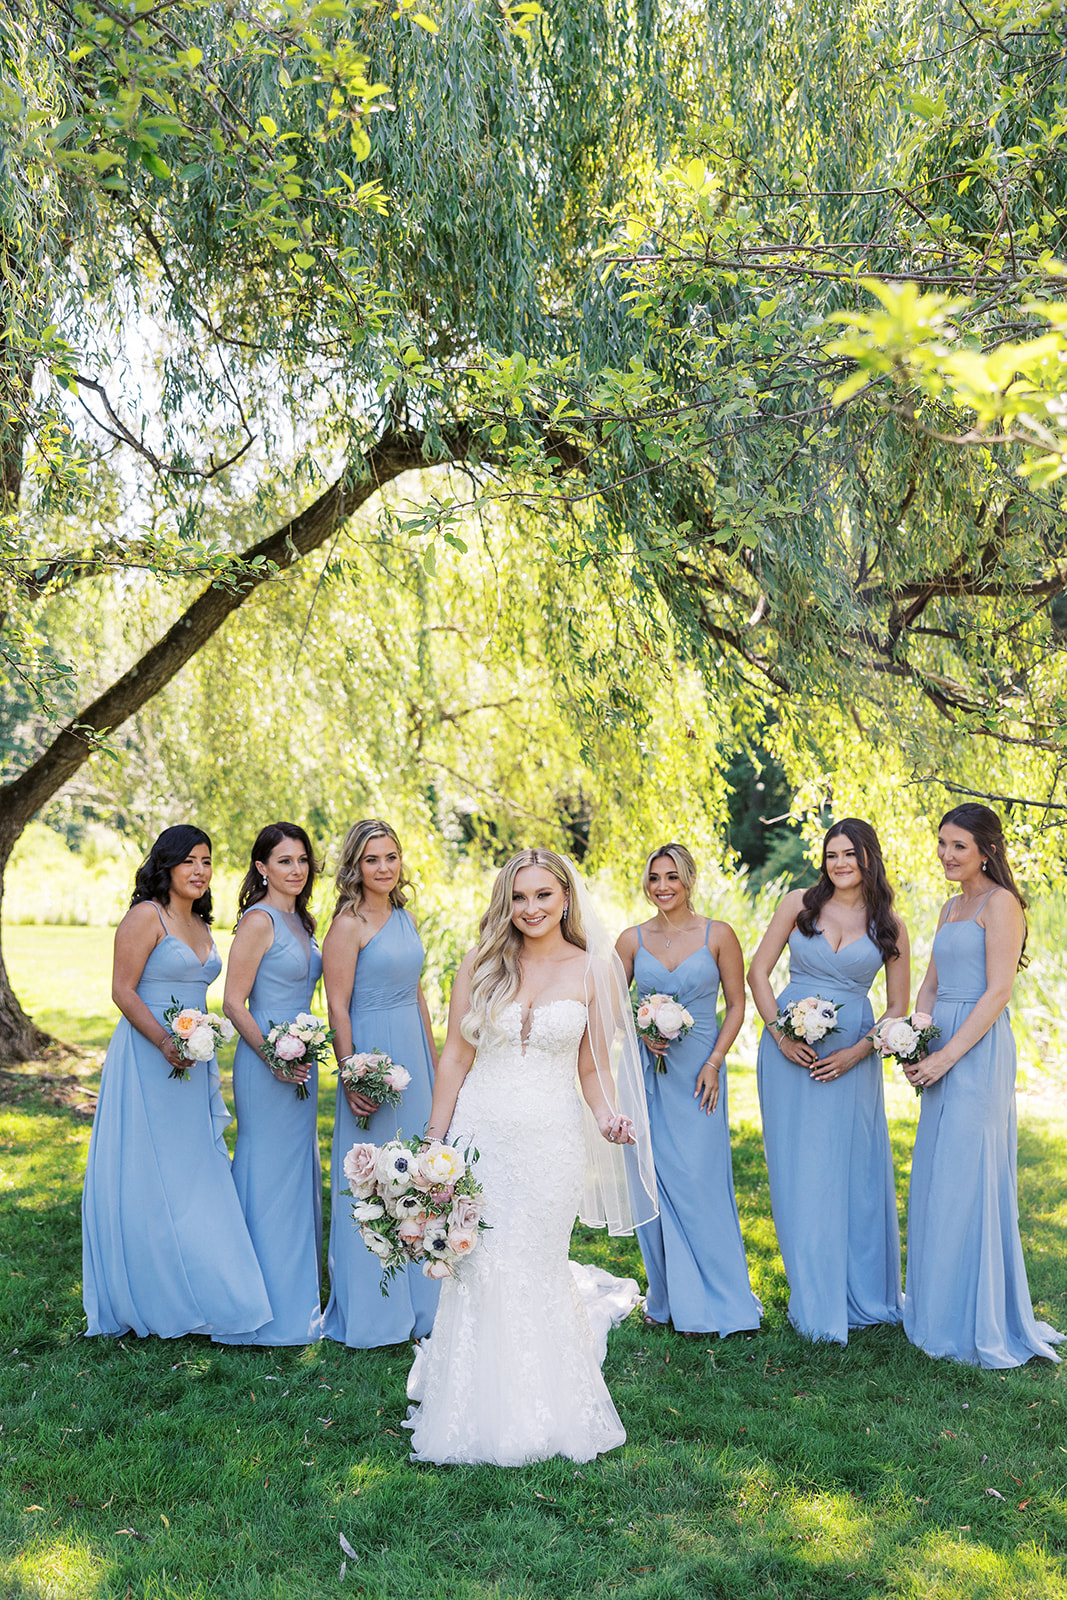 A bride walks under a willow tree in front of her six bridesmaids in baby blue dresses